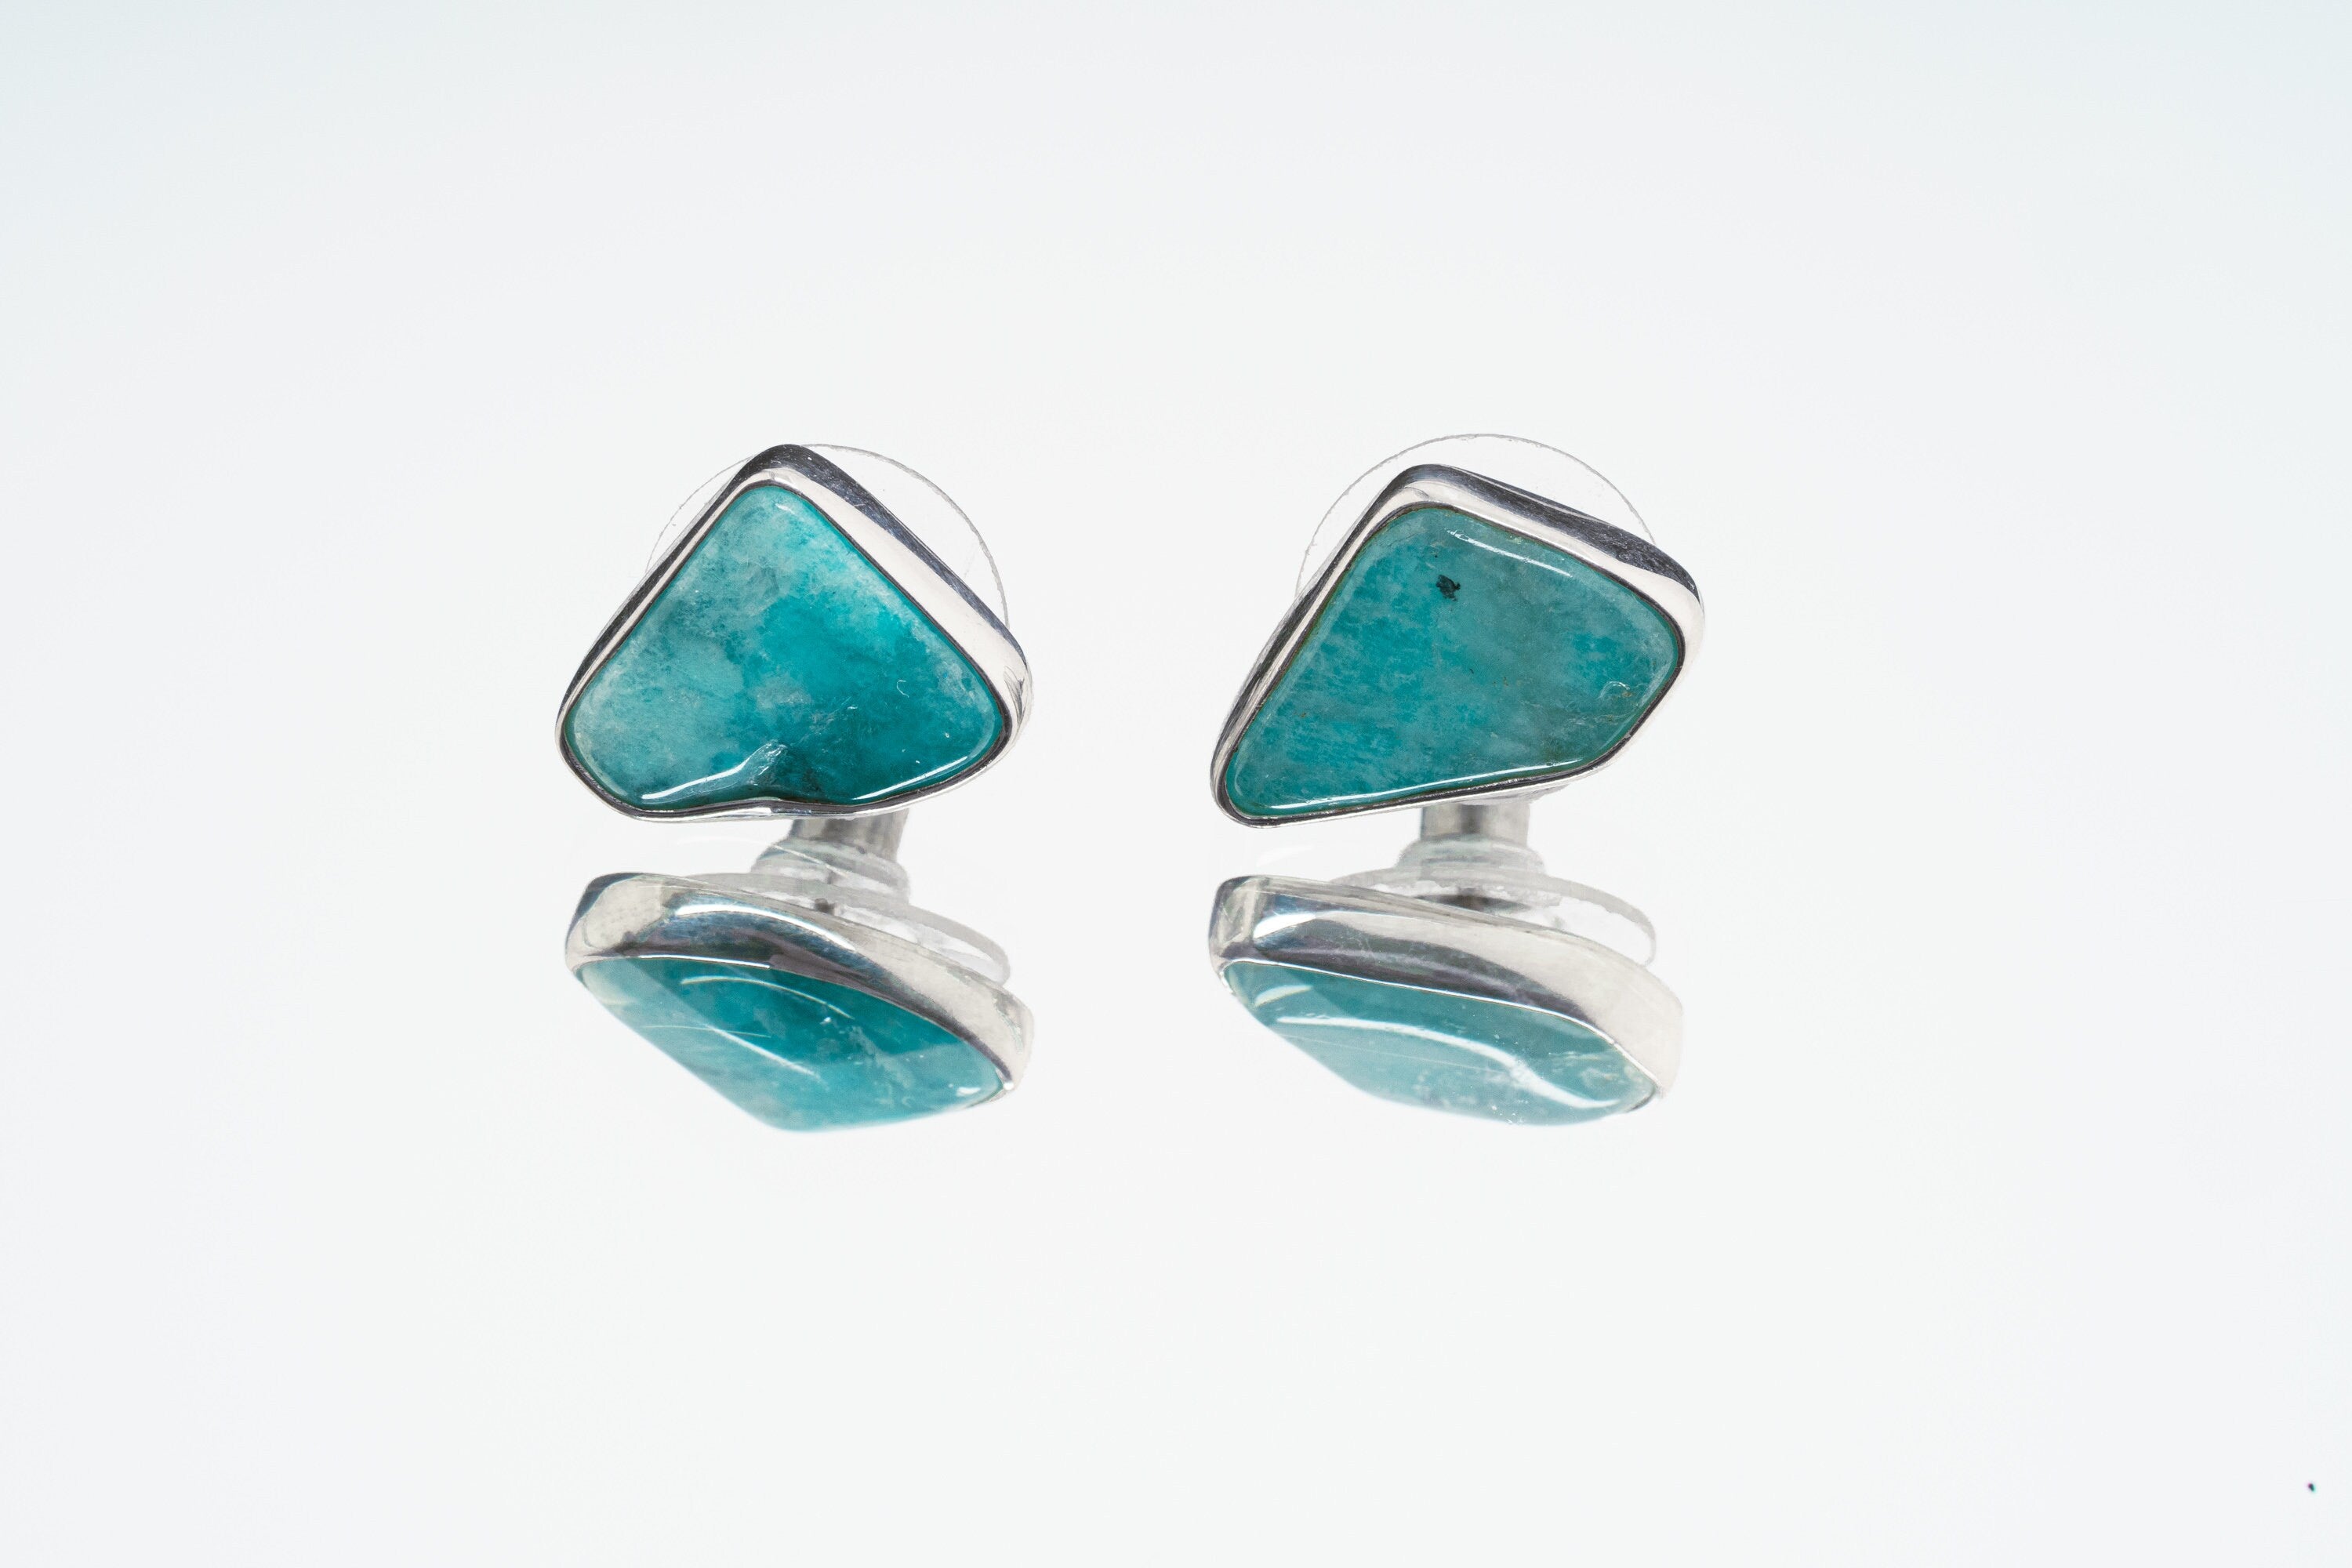 Gem Chrysocolla - Pick a organic shaped Pair- Sterling Silver - Polished Finish - Freeform Earring Studs